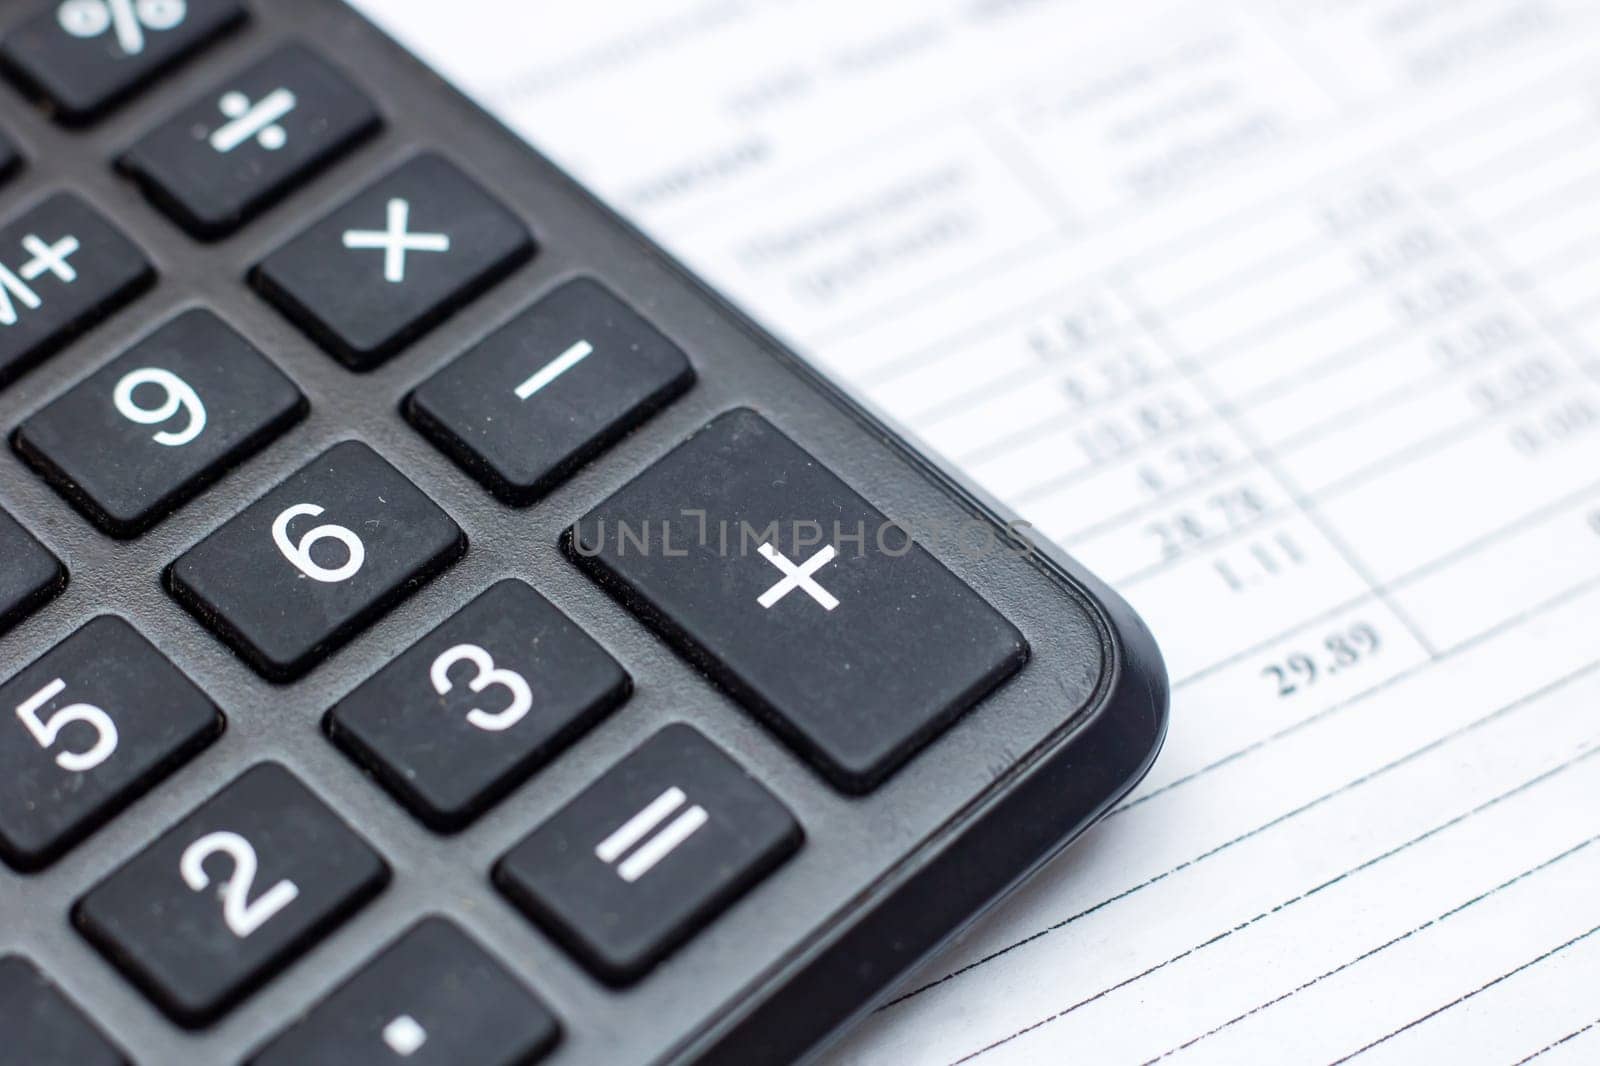 A closeup of a calculator, a peripheral input device, on top of a sheet of paper, office equipment often used with a computer keyboard or personal computer for calculations